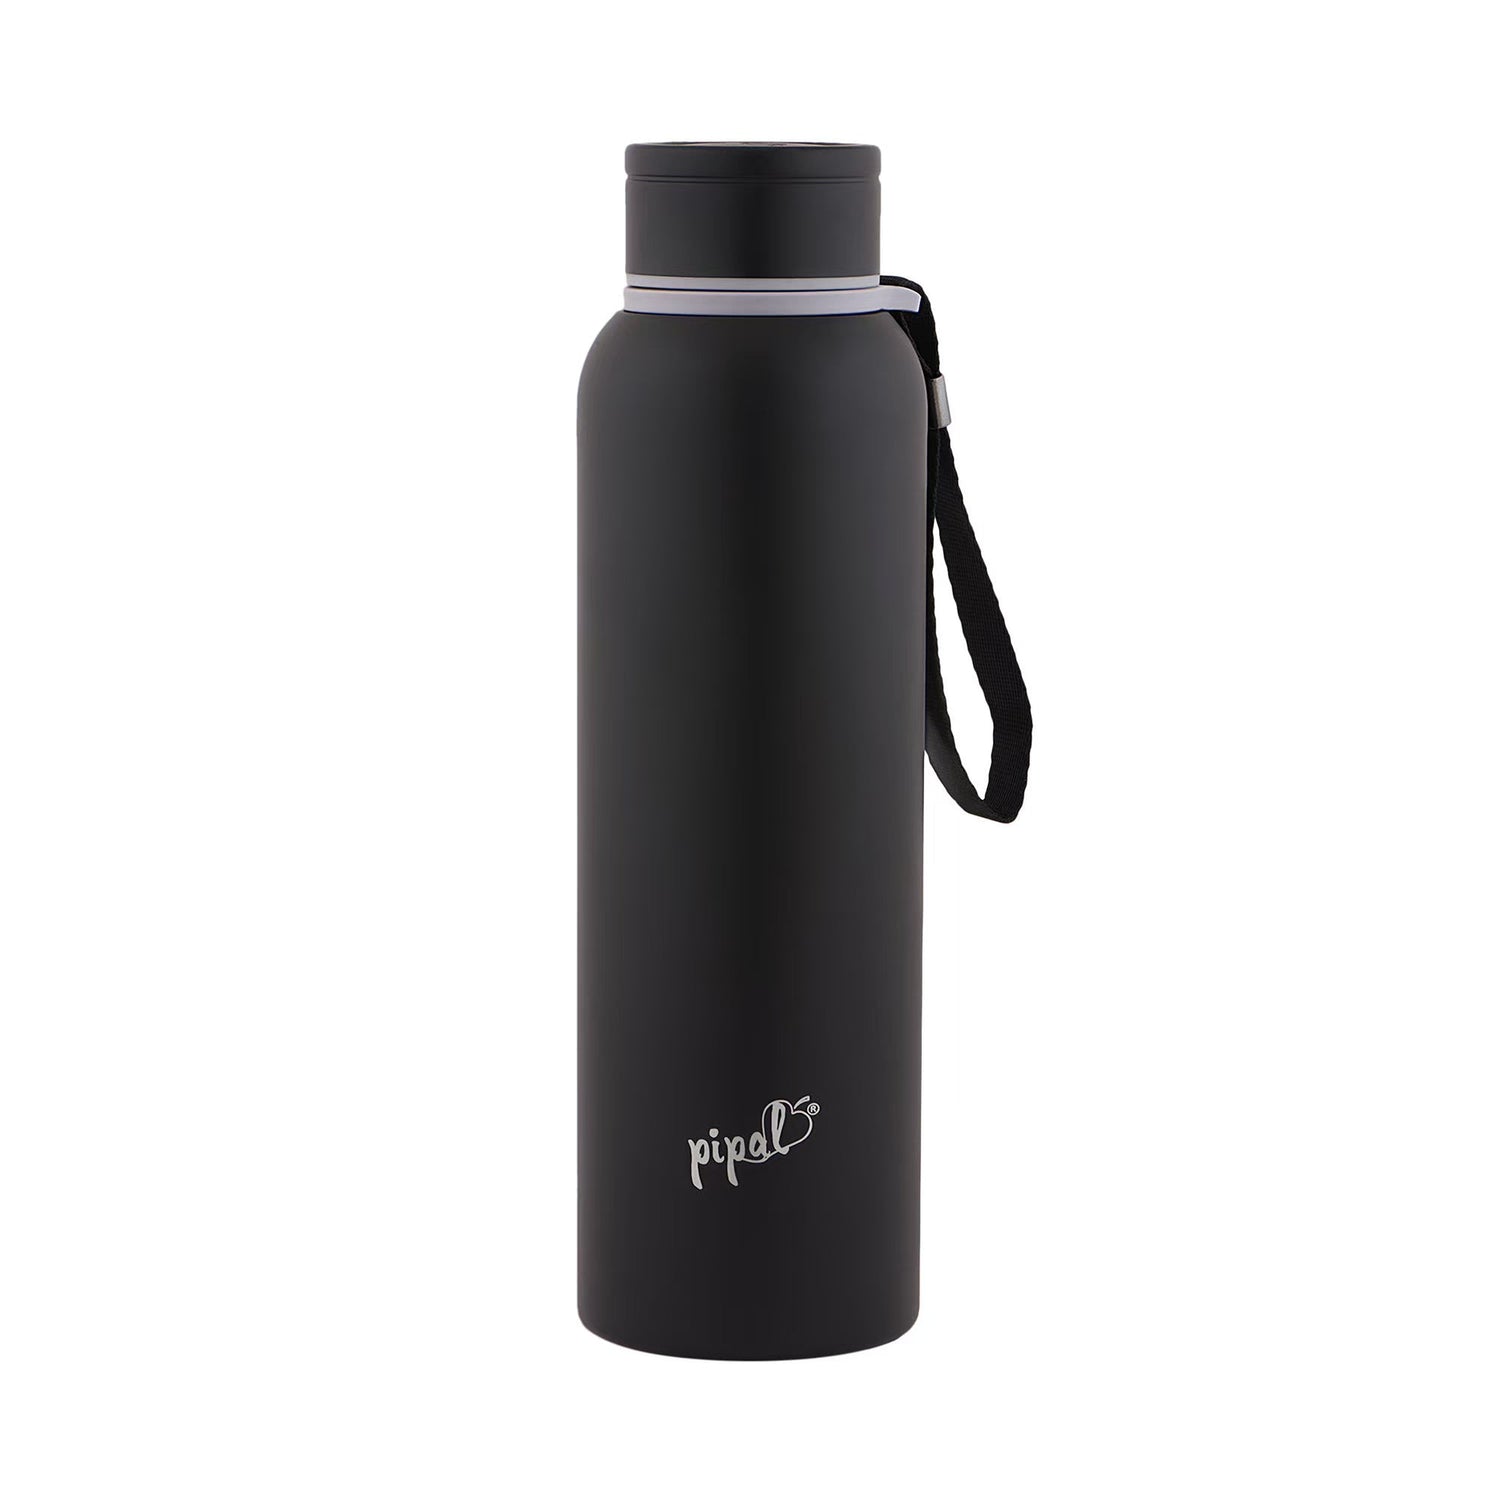 Pipal Opal Insulated Water Bottle